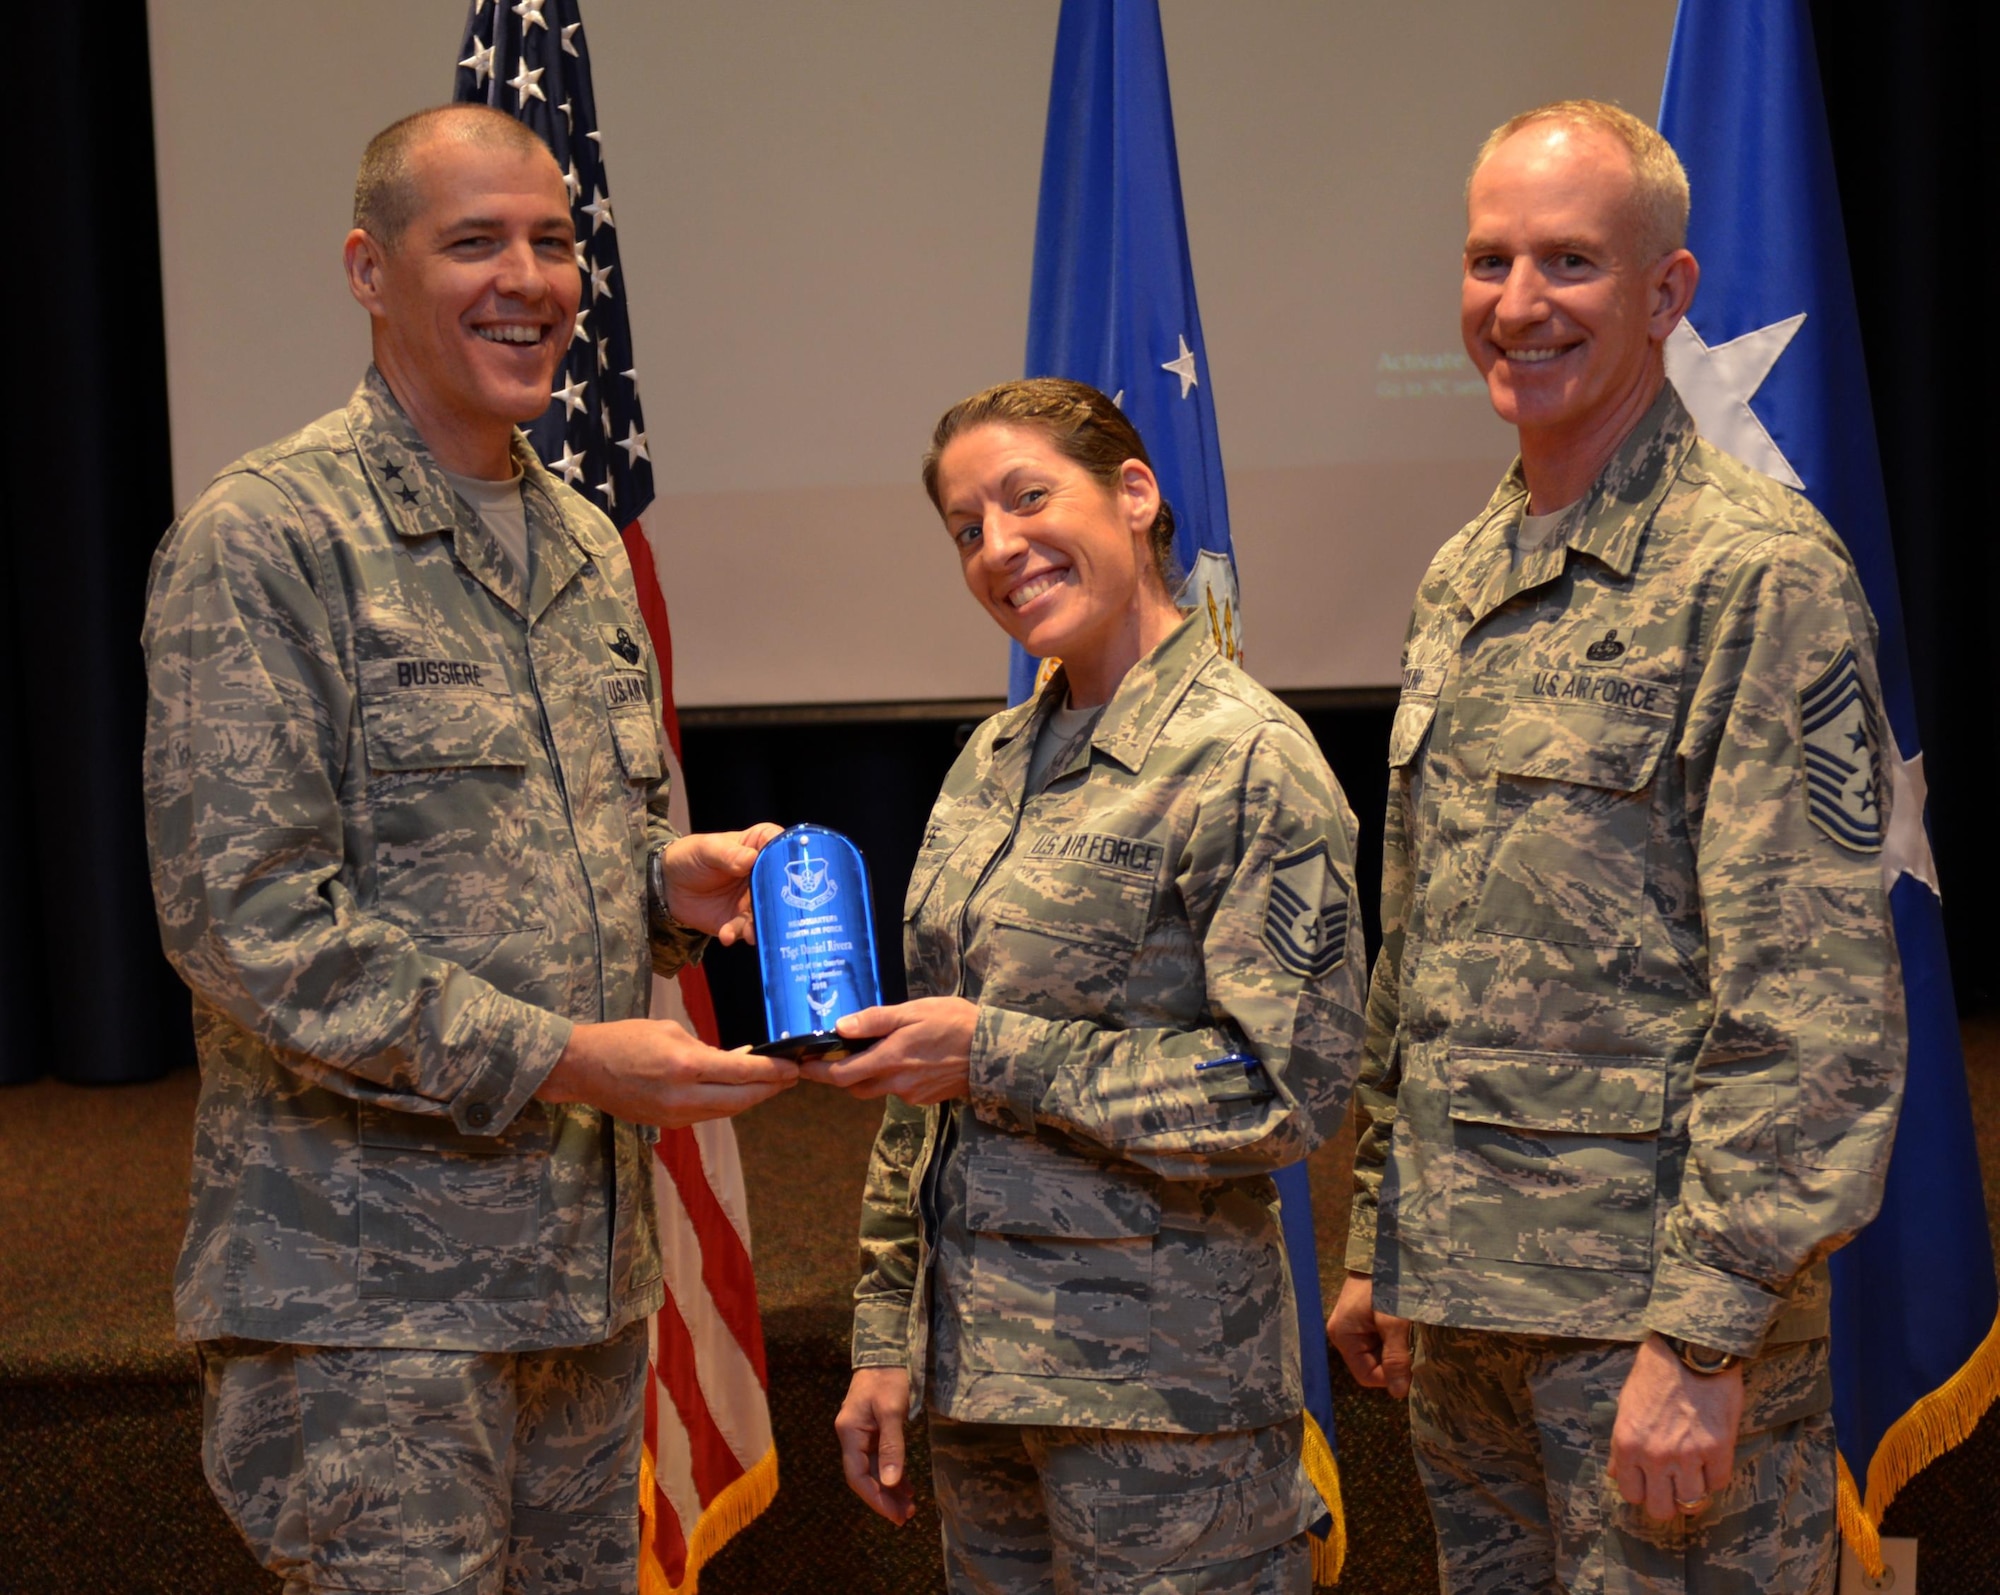 U.S. Air Force Maj. Gen. Thomas Bussiere, 8th Air Force commander, along with CMSgt. Alan Boling, 8th Air Force command chief, recognizes Quarterly Award winner Tech. Sgt. Daniel Rivera at Barksdale Air Force Base, La., Nov. 17, 2016. Accepting on his behalf is Master Sgt. Jennifer Relfe. (U.S. Air Force photo/Senior Airman Curtis Beach)